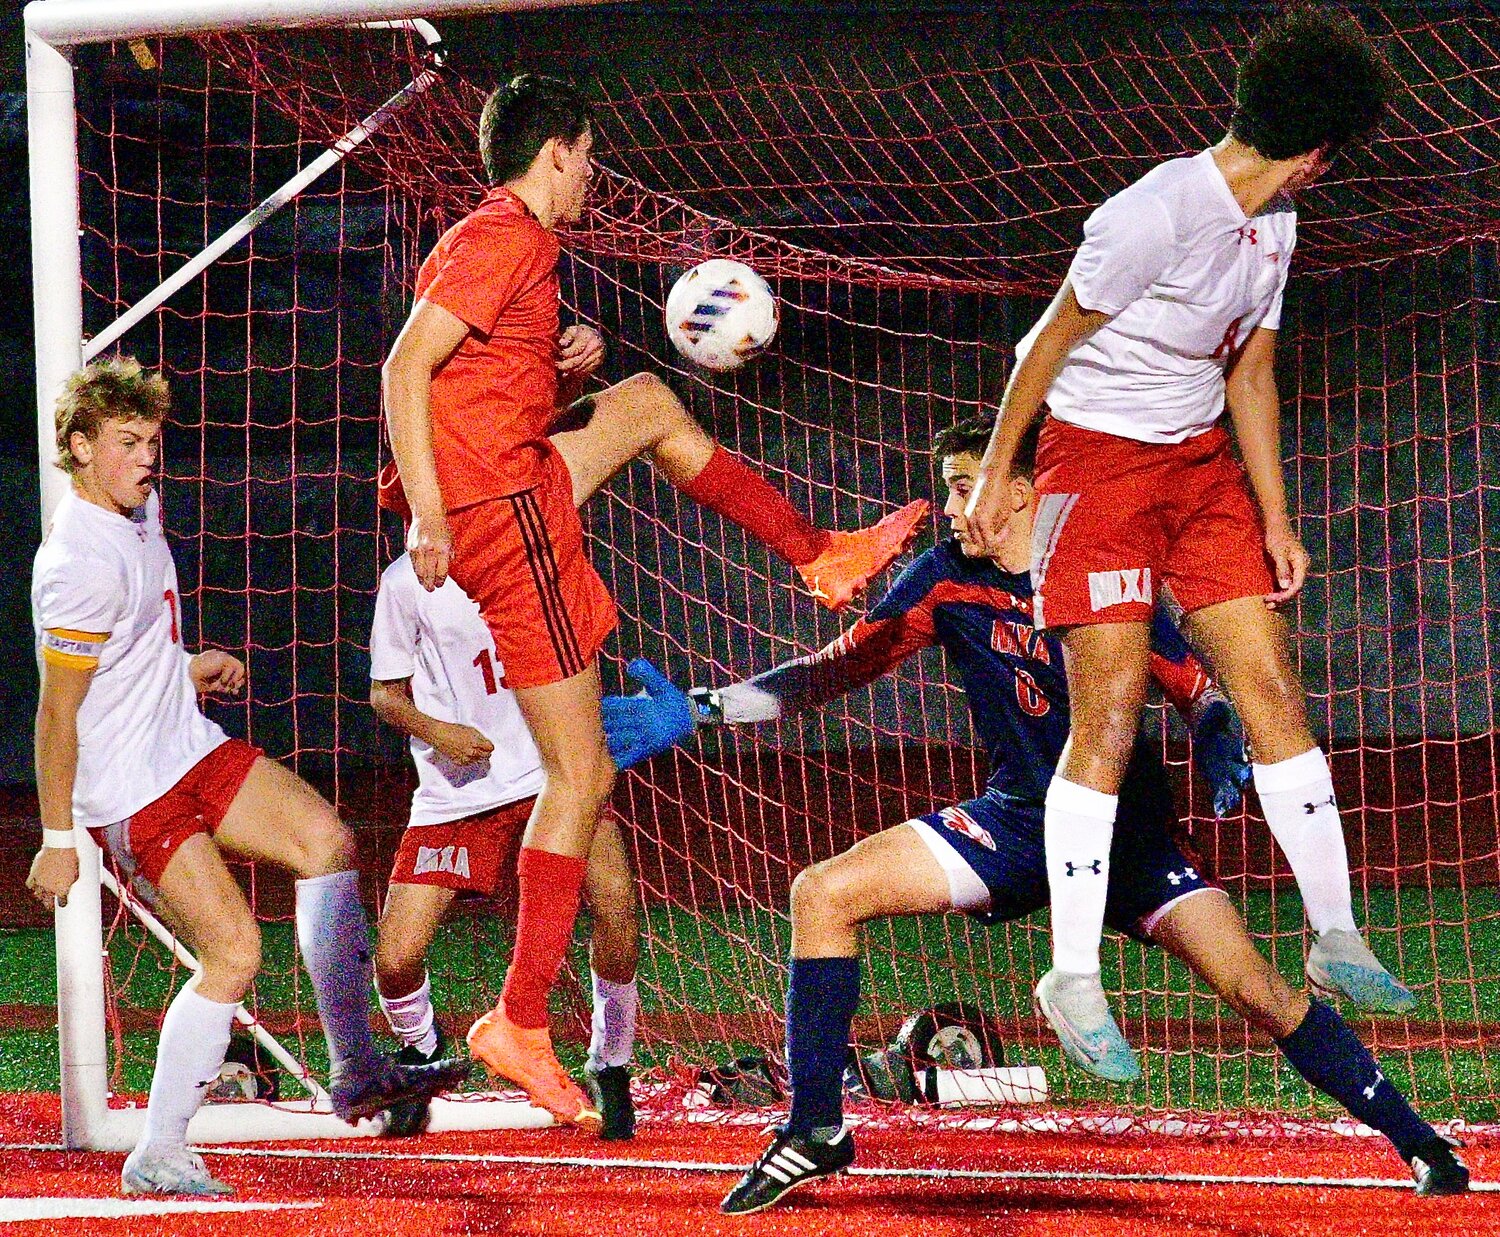 OZARK'S JAKE GARNER lift his left leg up above his waist to record a goal.